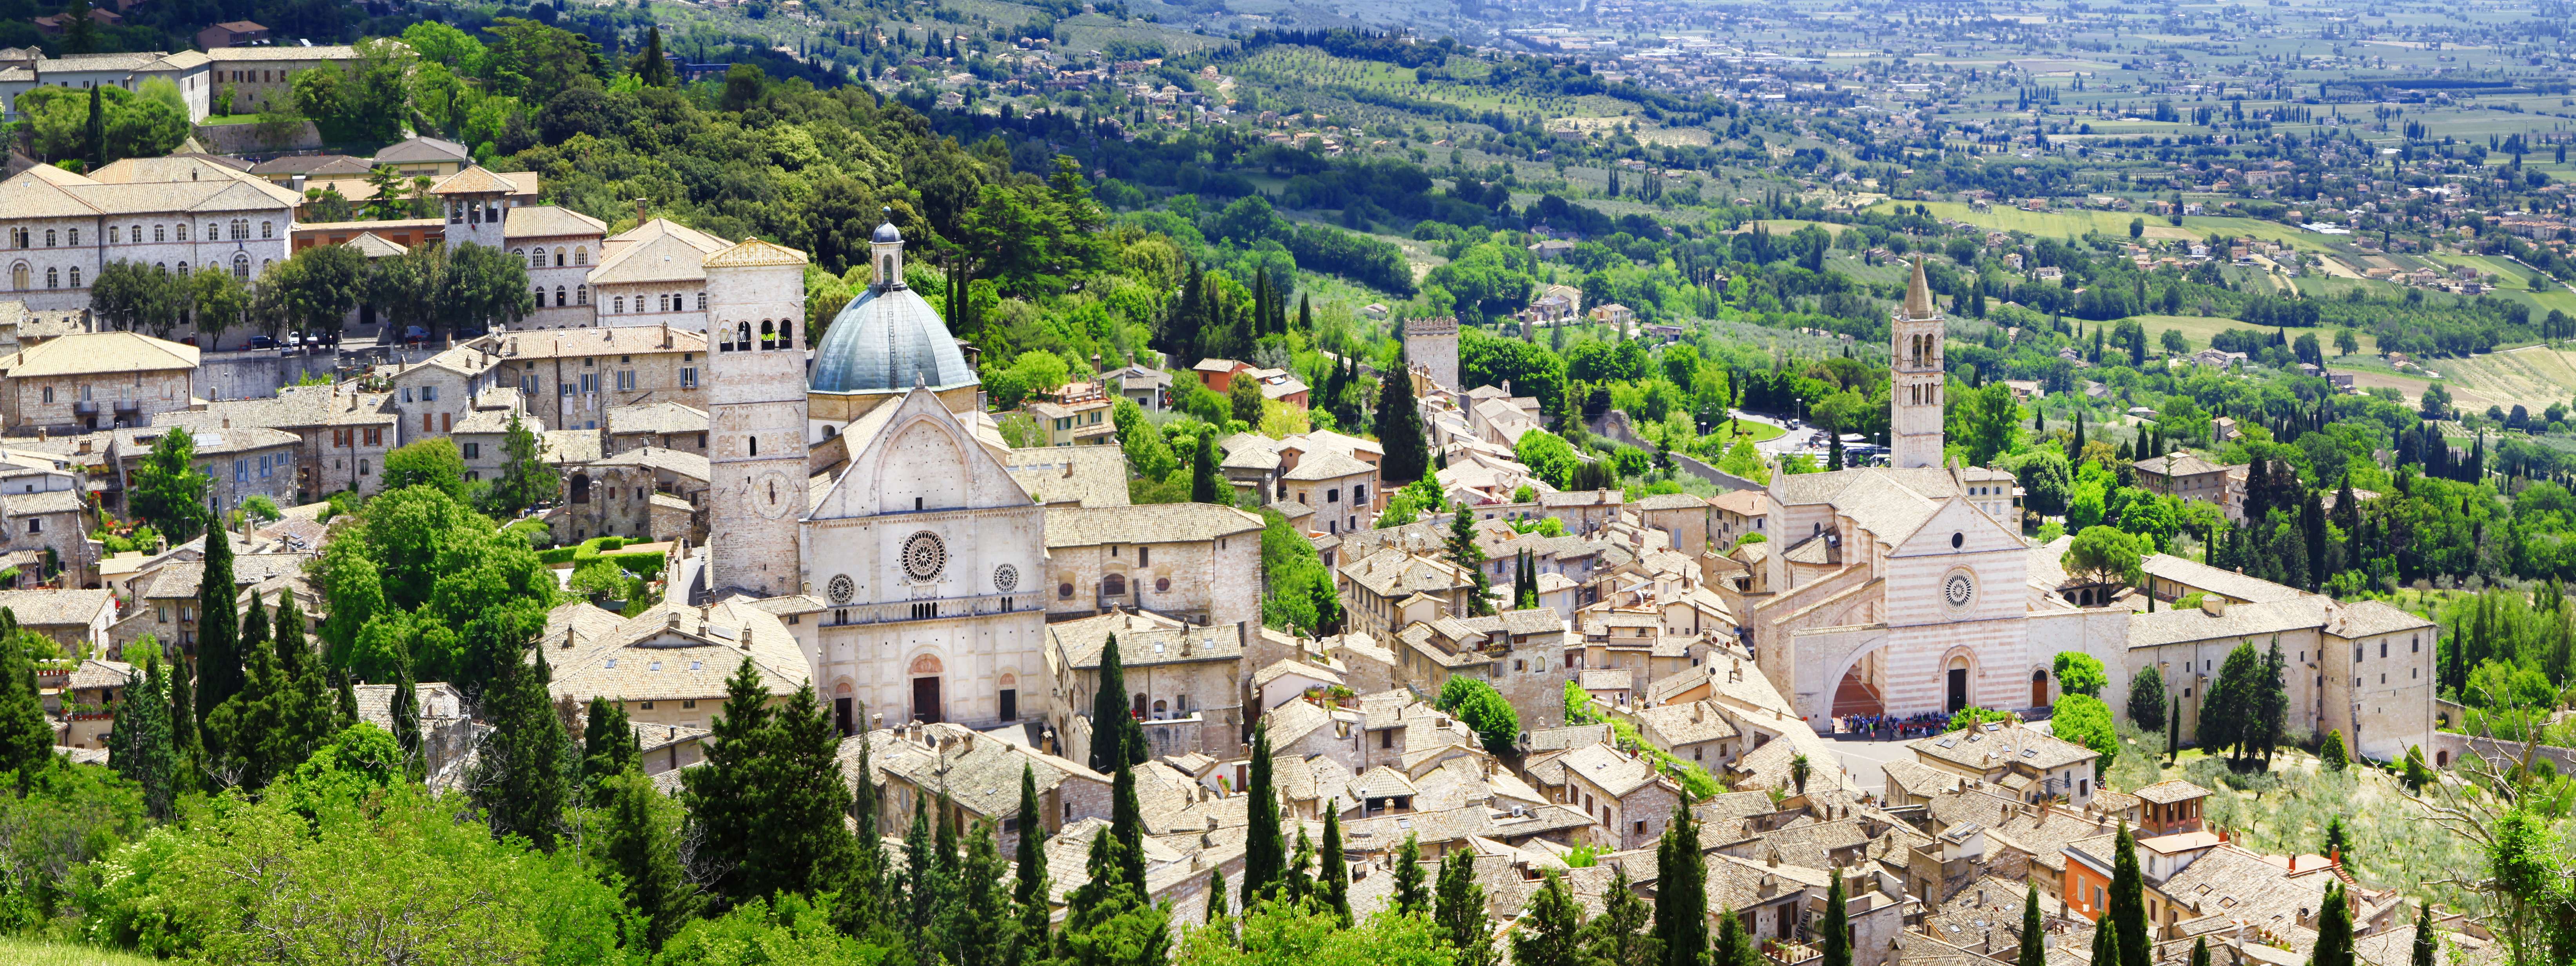 Day trip to Assisi from Rome 2